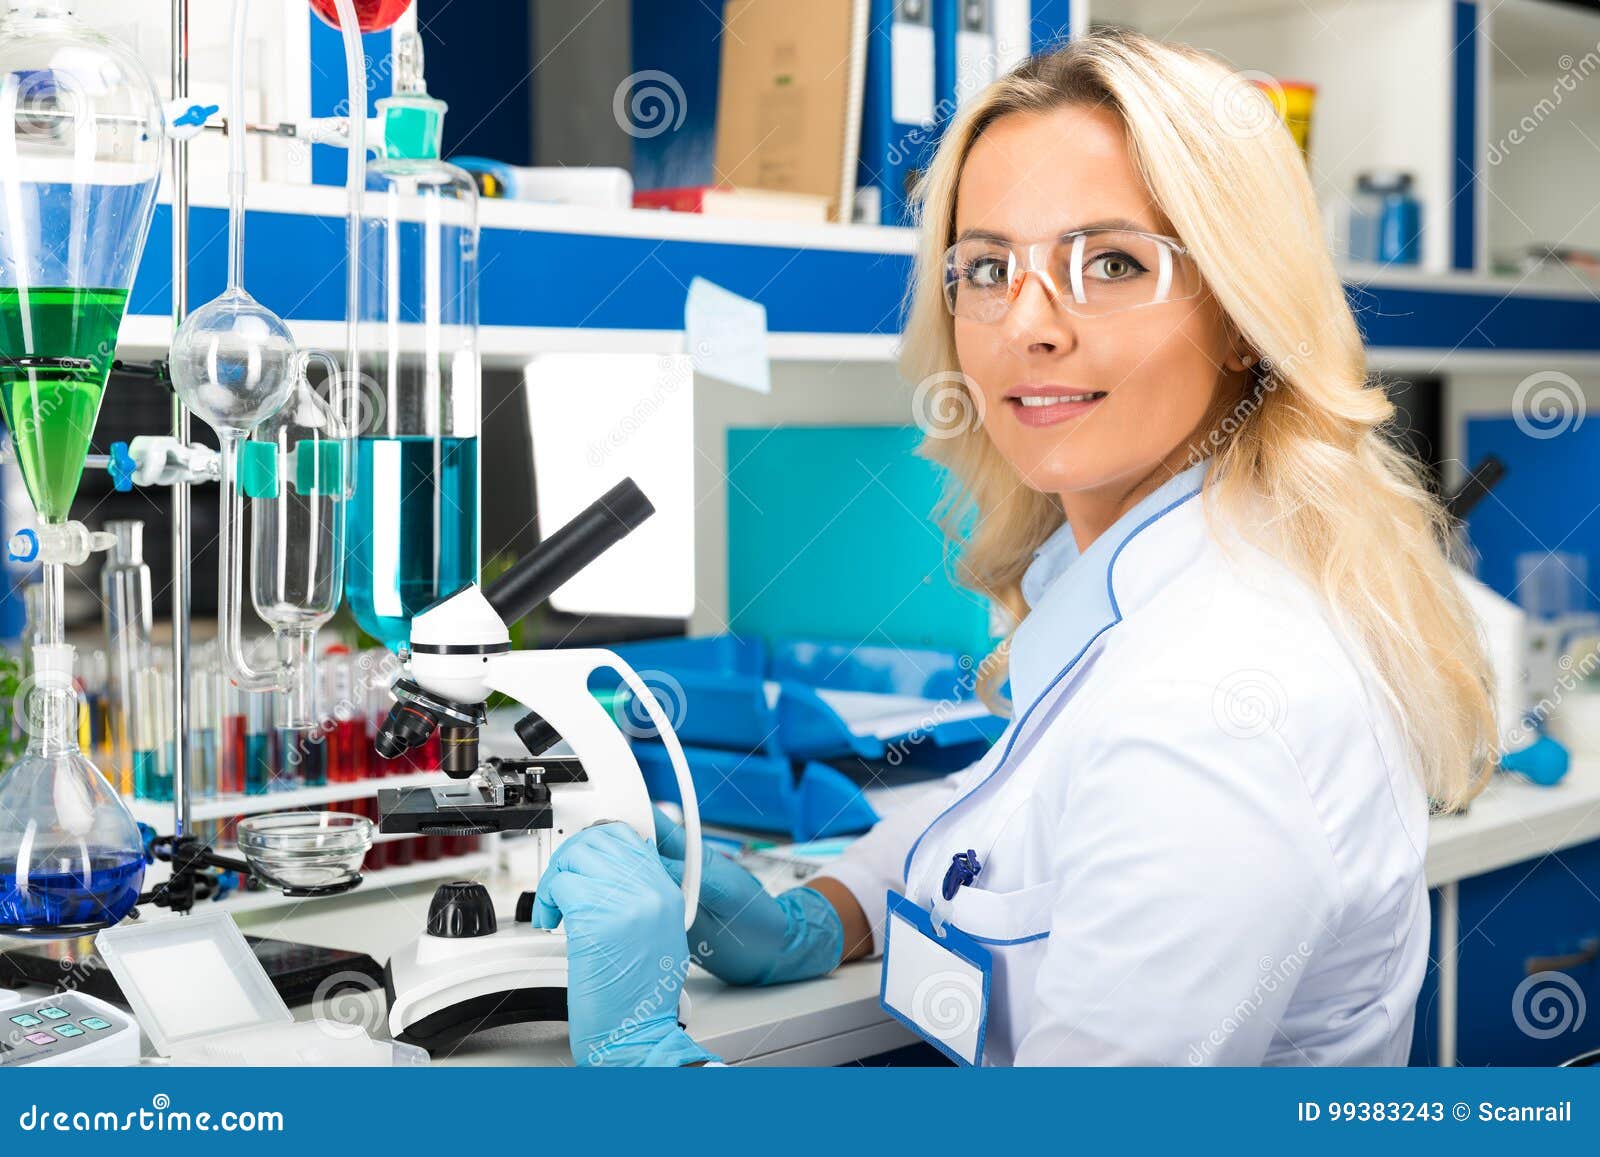 young attractive woman scientist researching in the laboratory